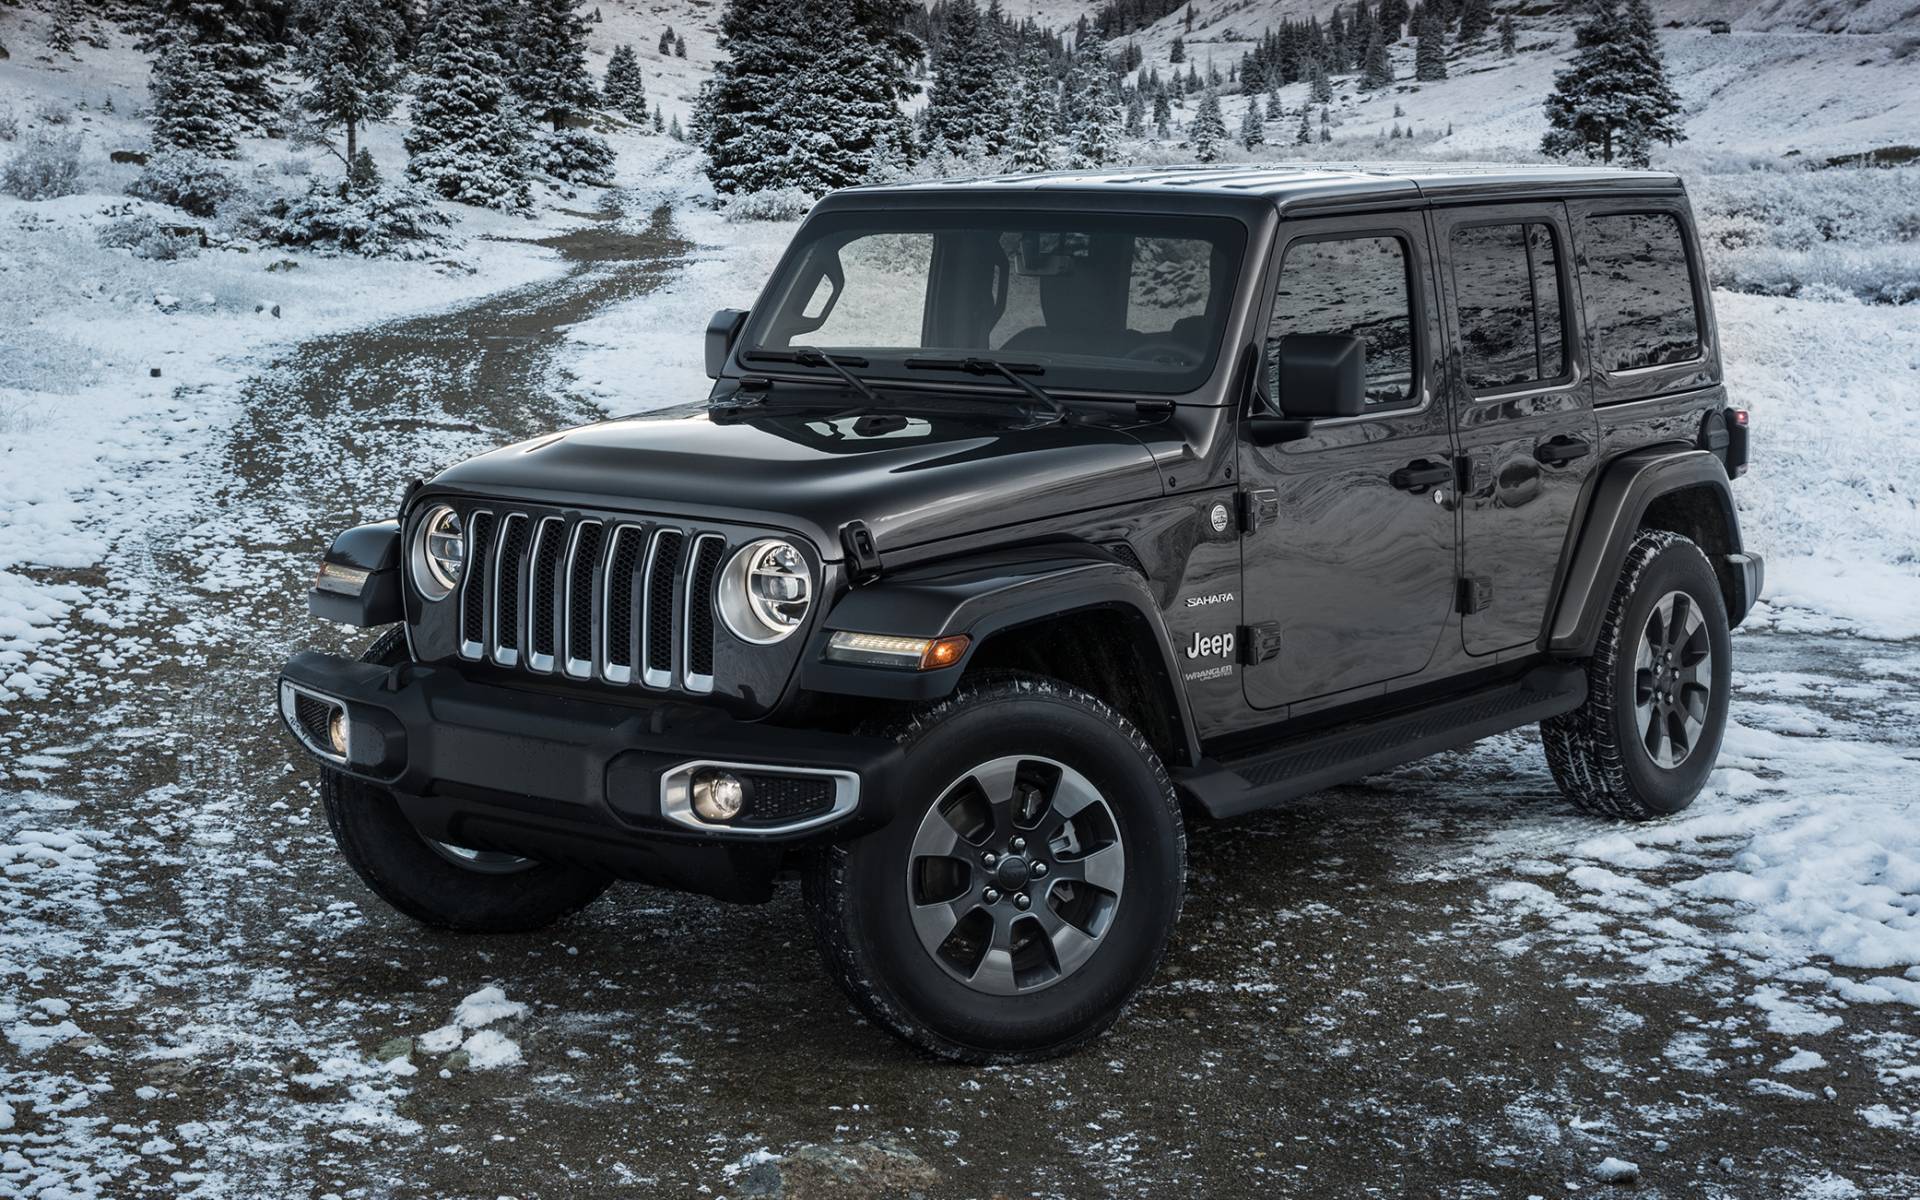 What Are the Differences Between the 2020 Jeep Wrangler Models